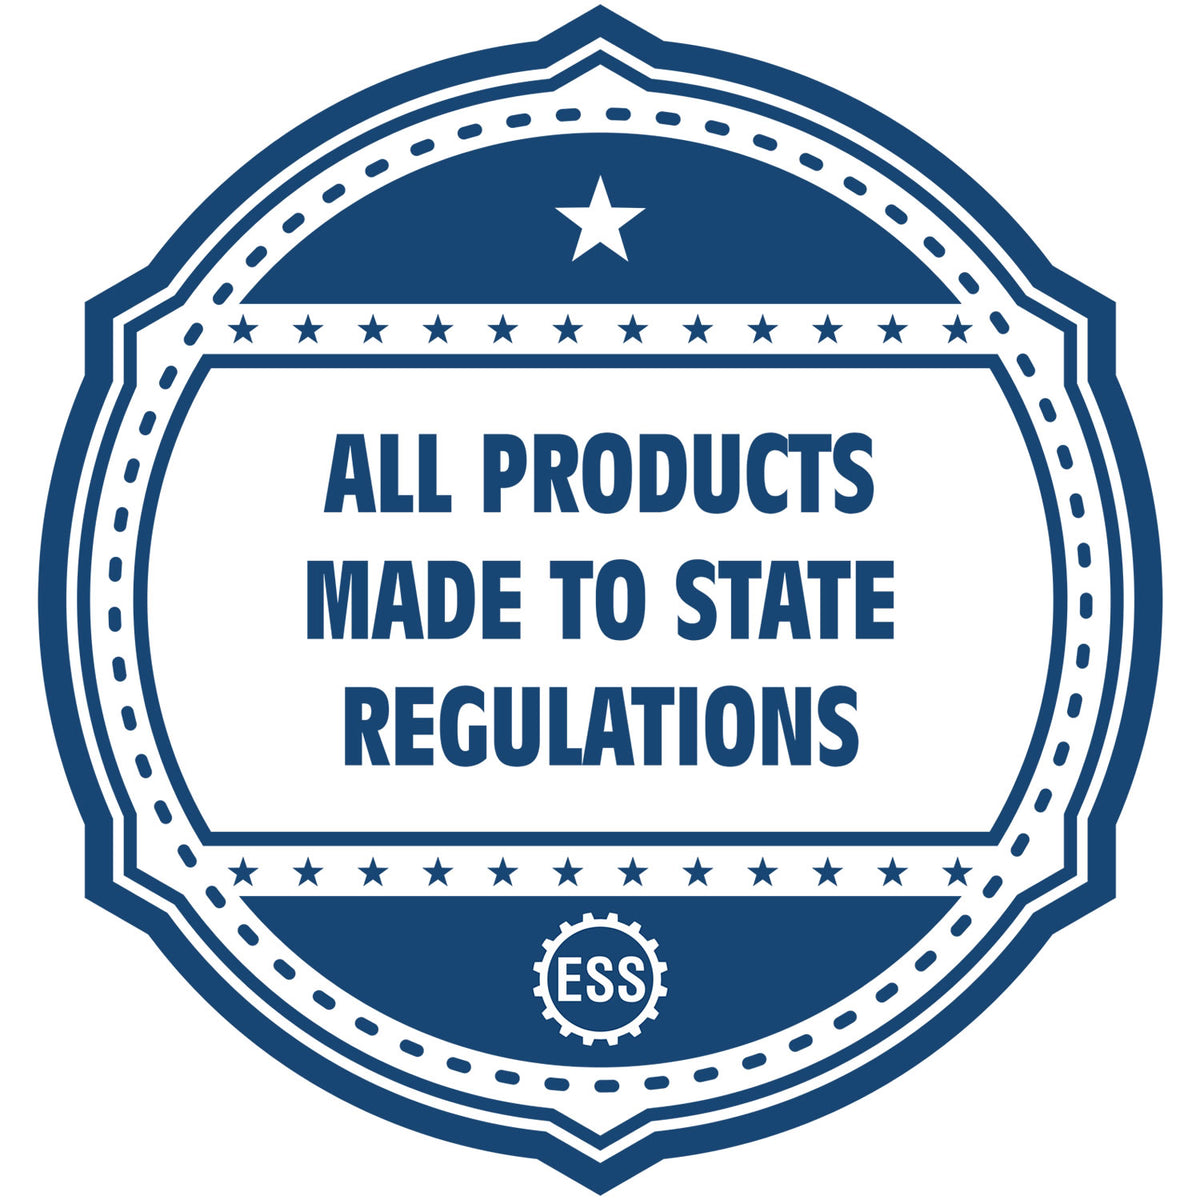 An icon or badge element for the PSI Minnesota Notary Stamp showing that this product is made in compliance with state regulations.